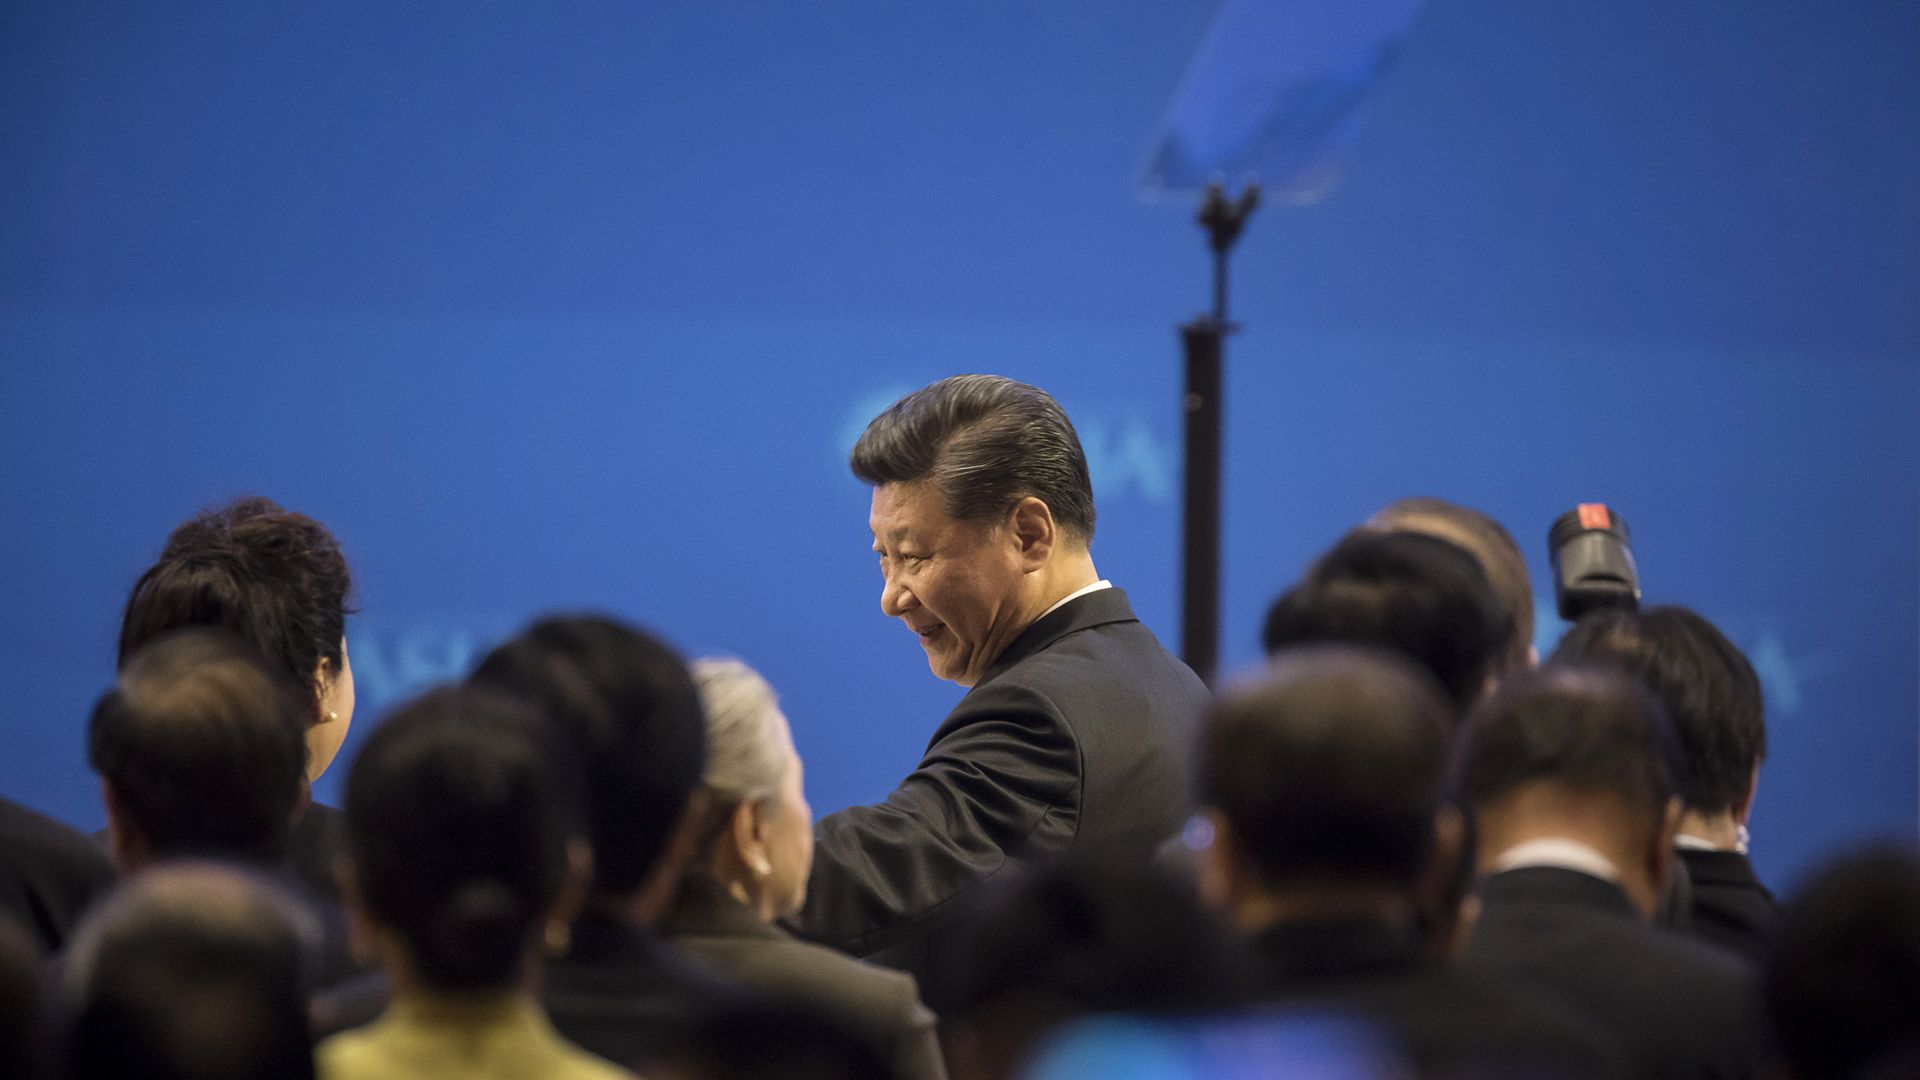 Xi Jinping walks past photographers to take the stage